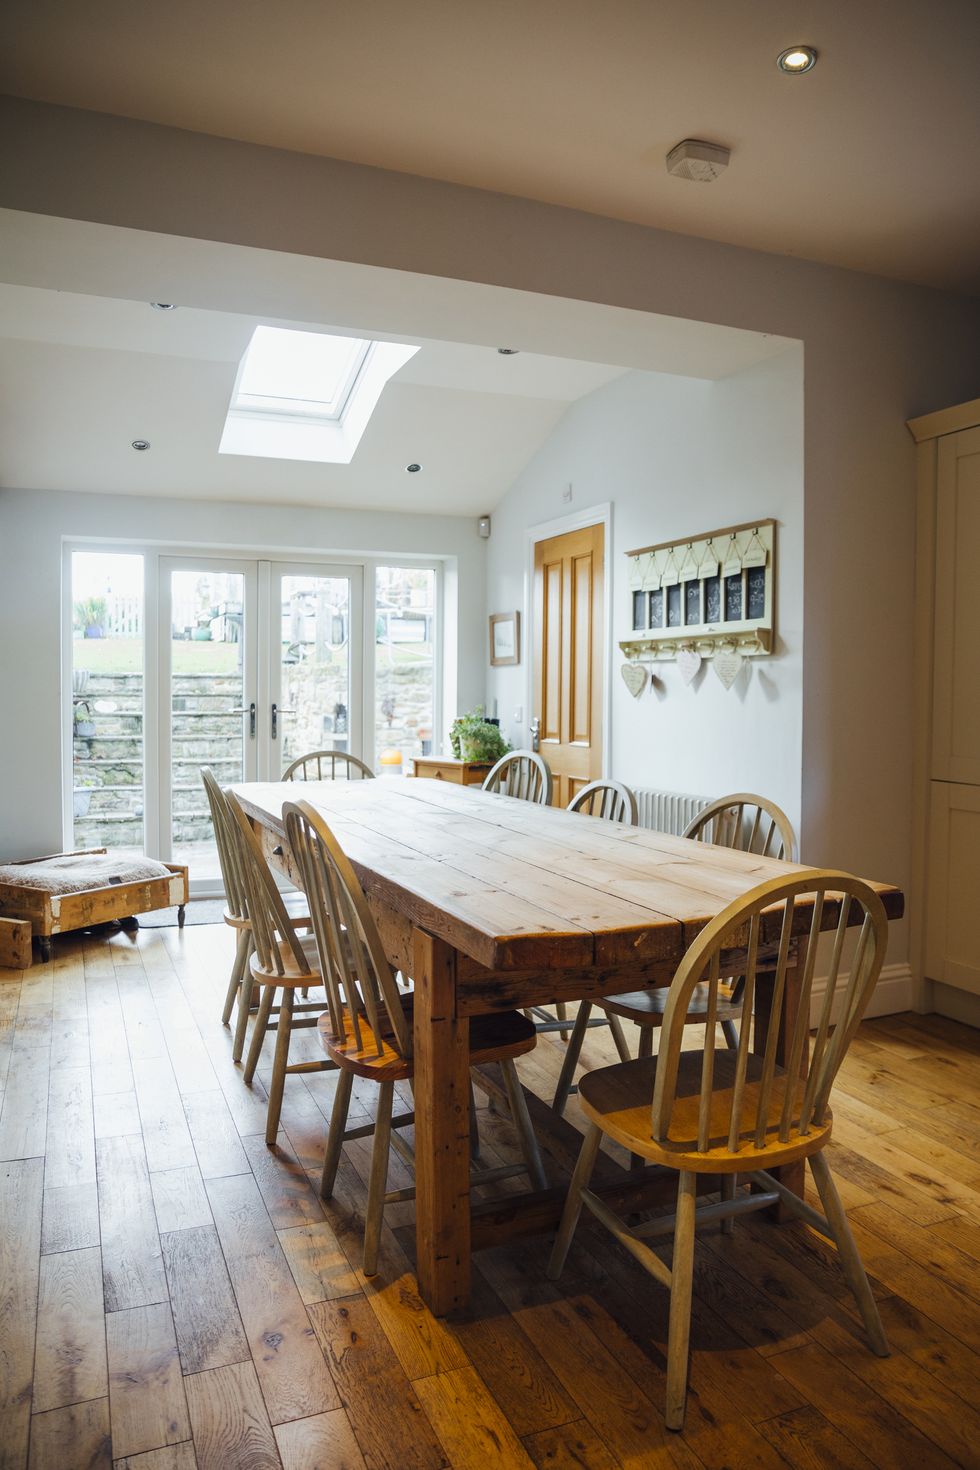 a wide angle view of a country style kitchen in a family home in northumberland in the north east of england with a long dining table for a large family